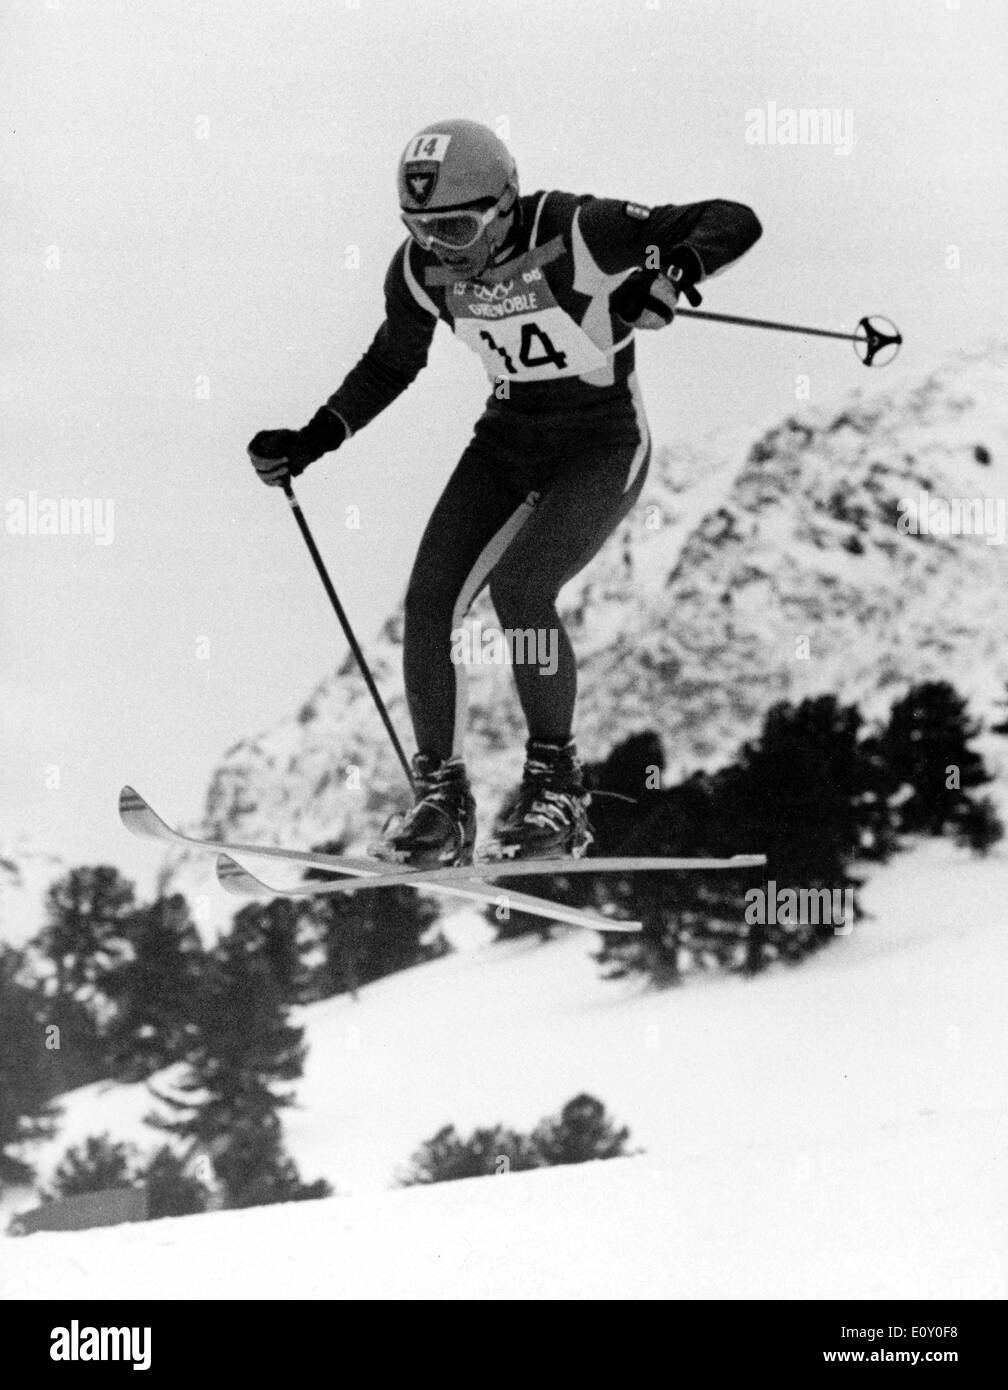 Feb 06, 1968; Grenoble, FRANCE; (File Photo) The French skier JEAN CLAUDE KILLY winning the gold medal at winter olympics. Stock Photo